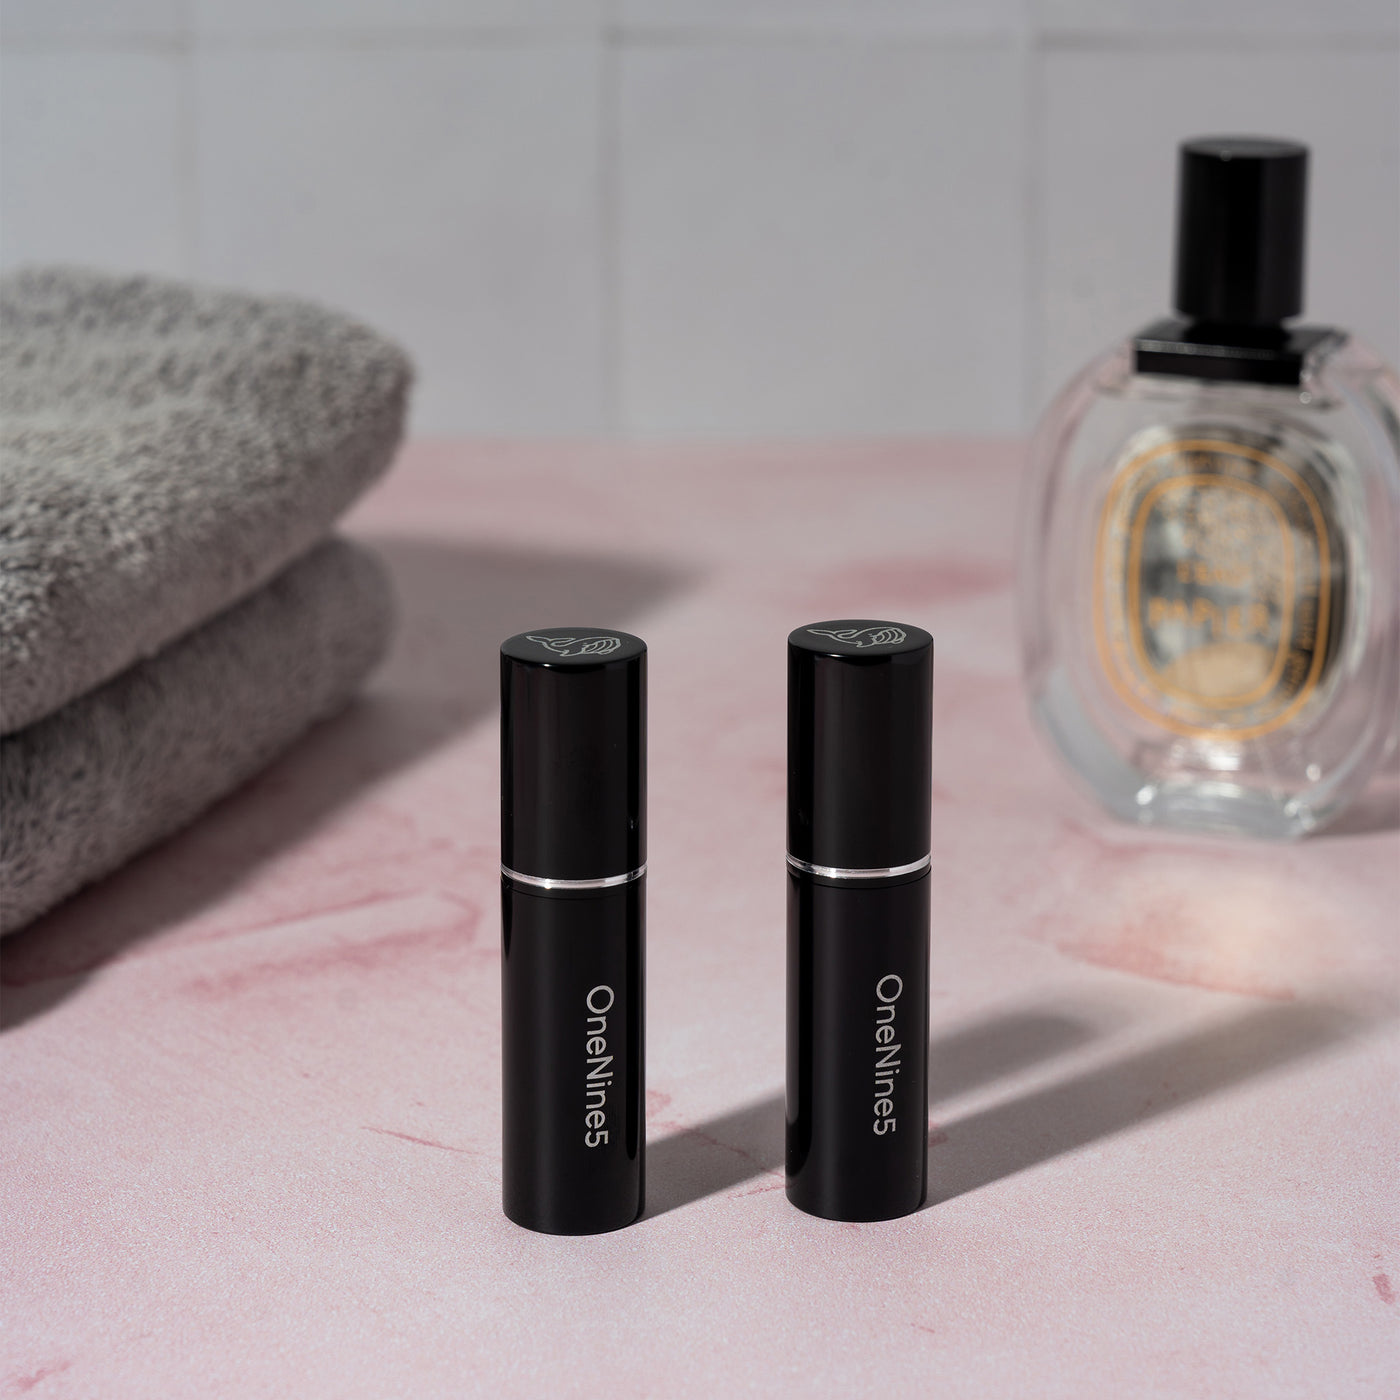 Two black OneNine5 refillable perfume & aftershave bottles. With towels in the background and a 100ml perfume bottle 